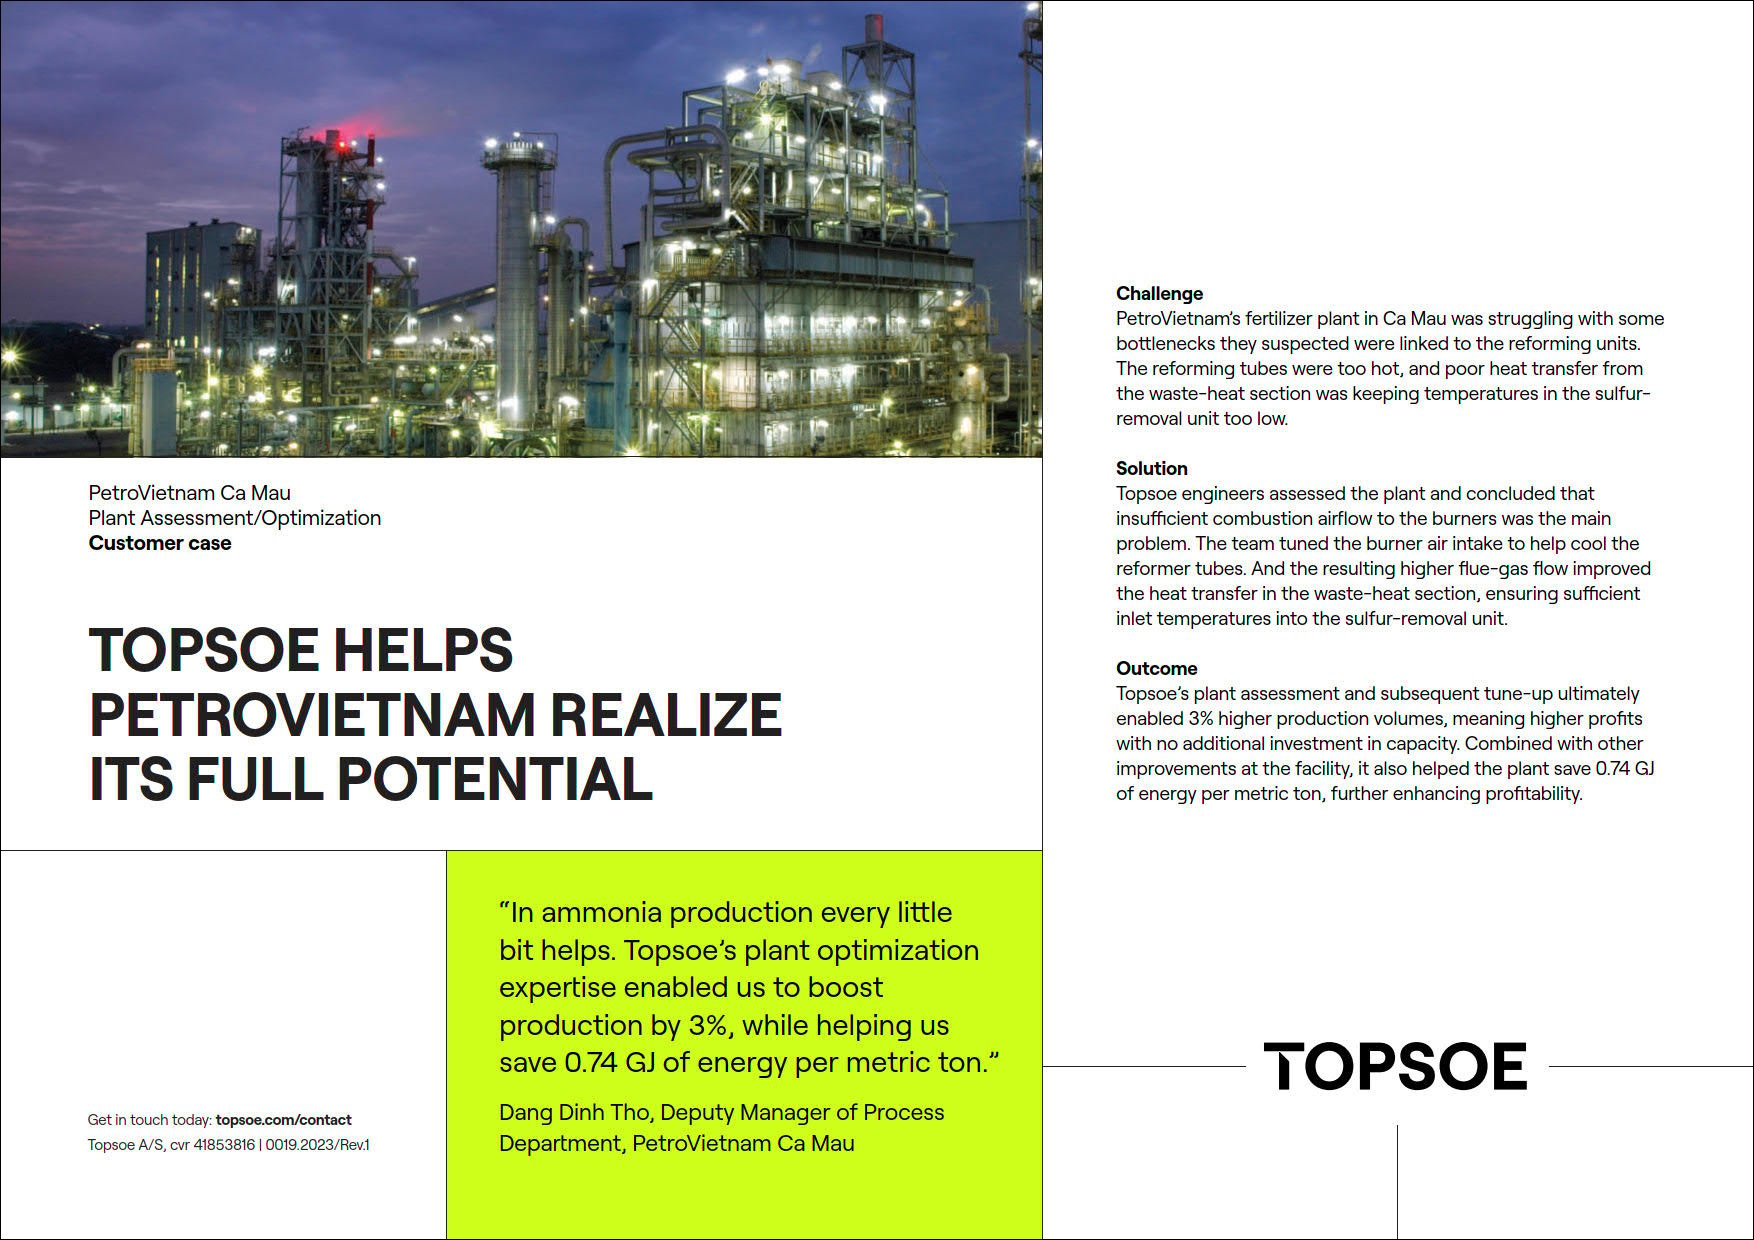 Topsoe helps PetroVietnam realize its full potential